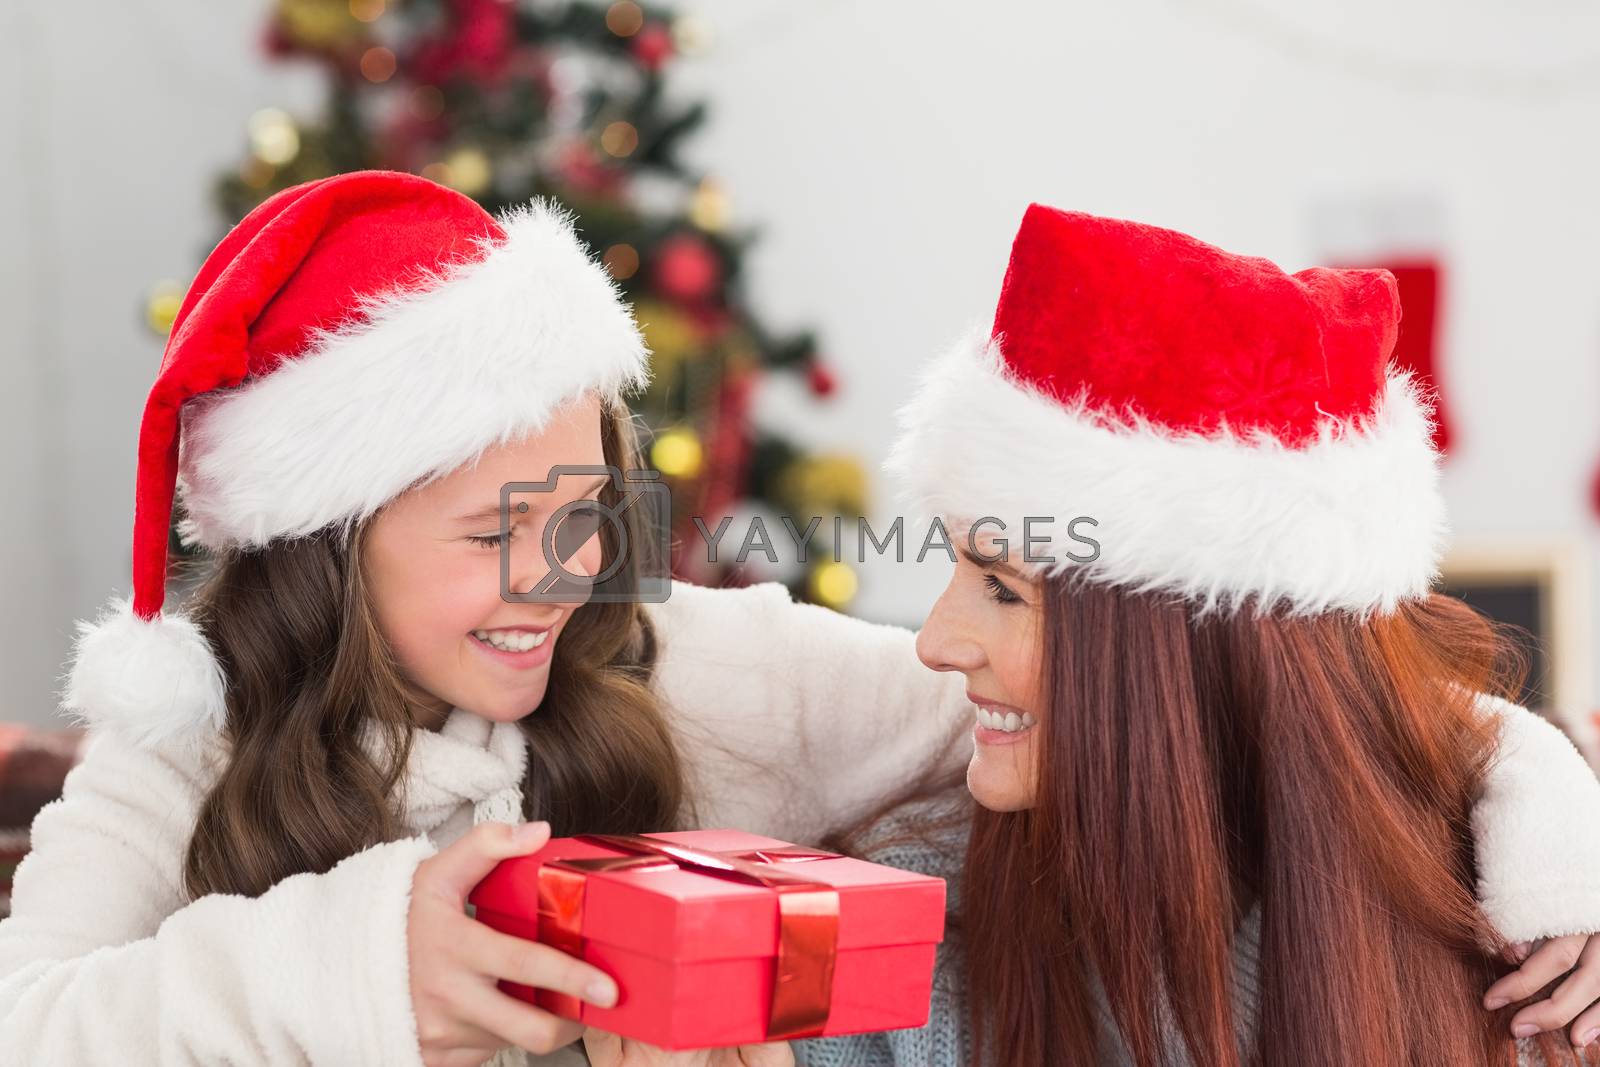 Royalty free image of Festive mother and daughter smiling at each other by Wavebreakmedia